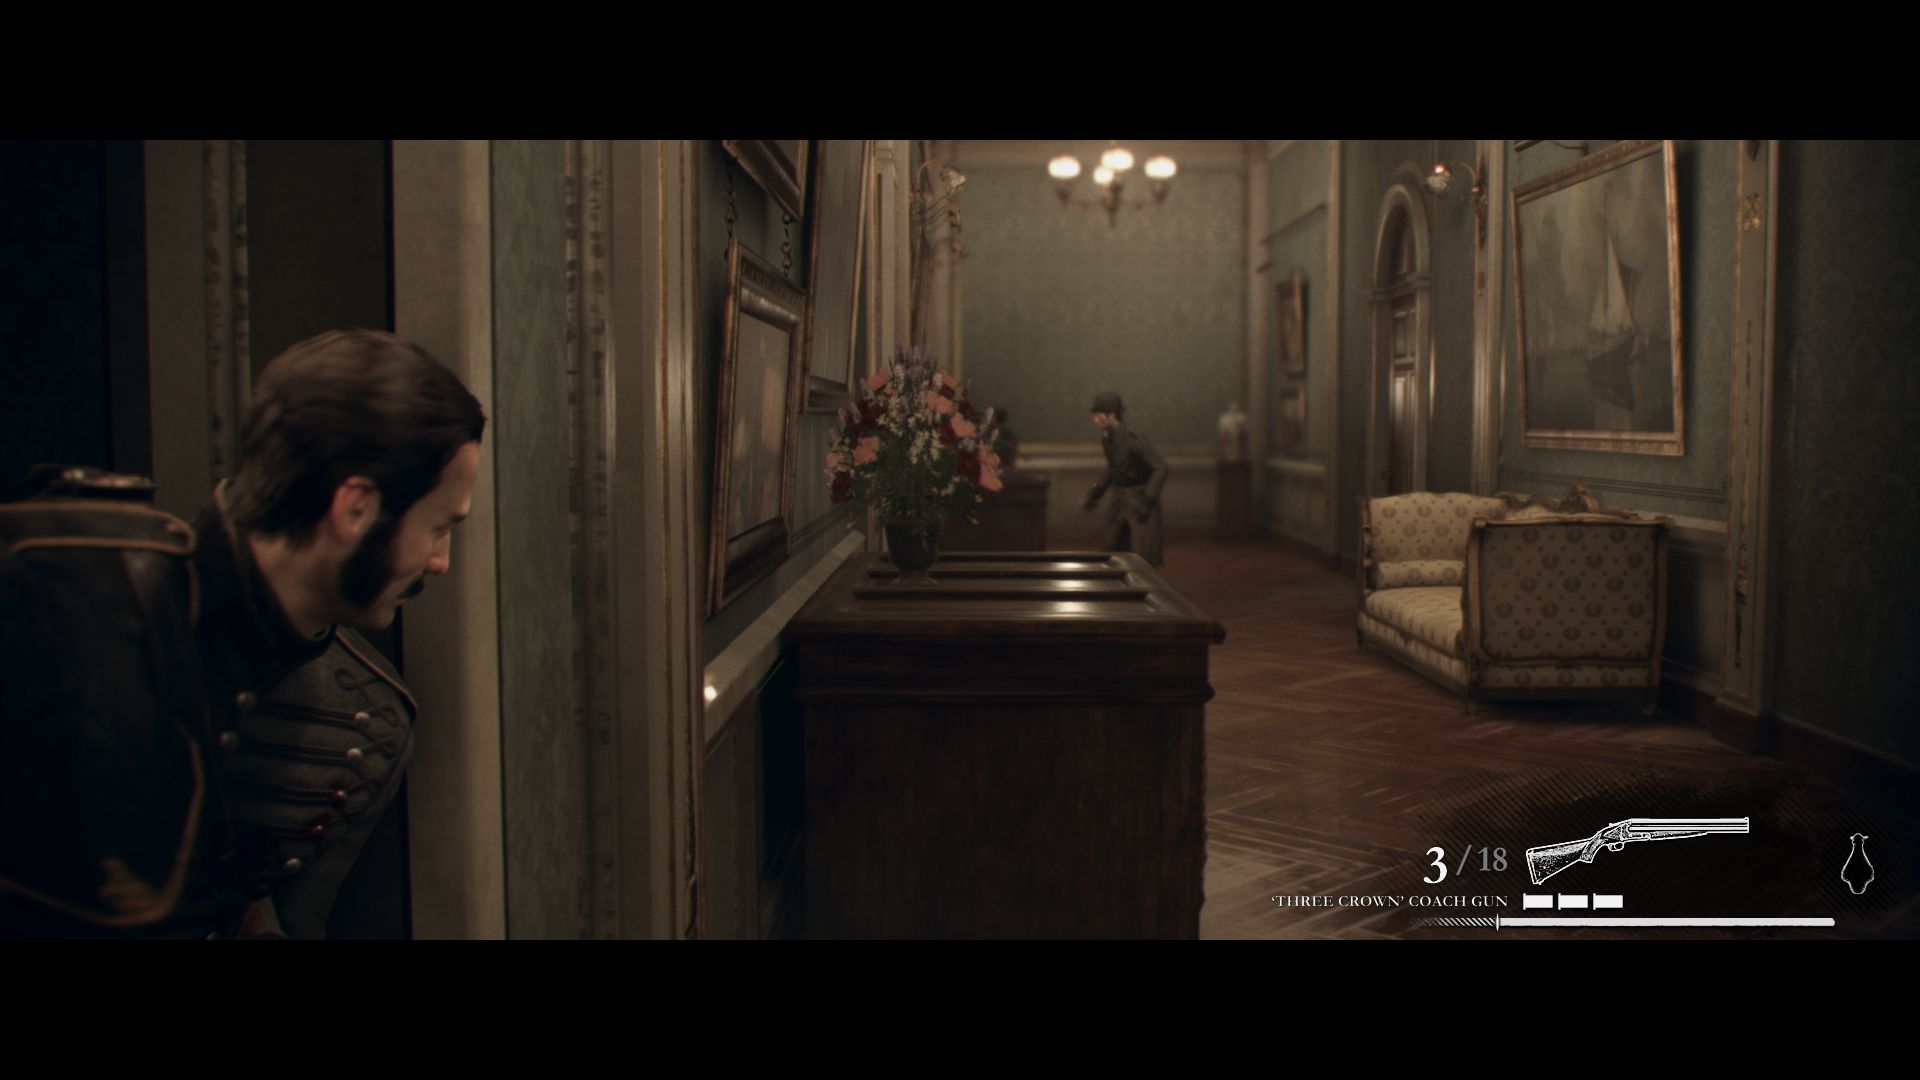 Order обзор. The order: 1886. Order 1886 ps4. The order 1886 геймплей. Орден 1886 ps4 Gameplay.